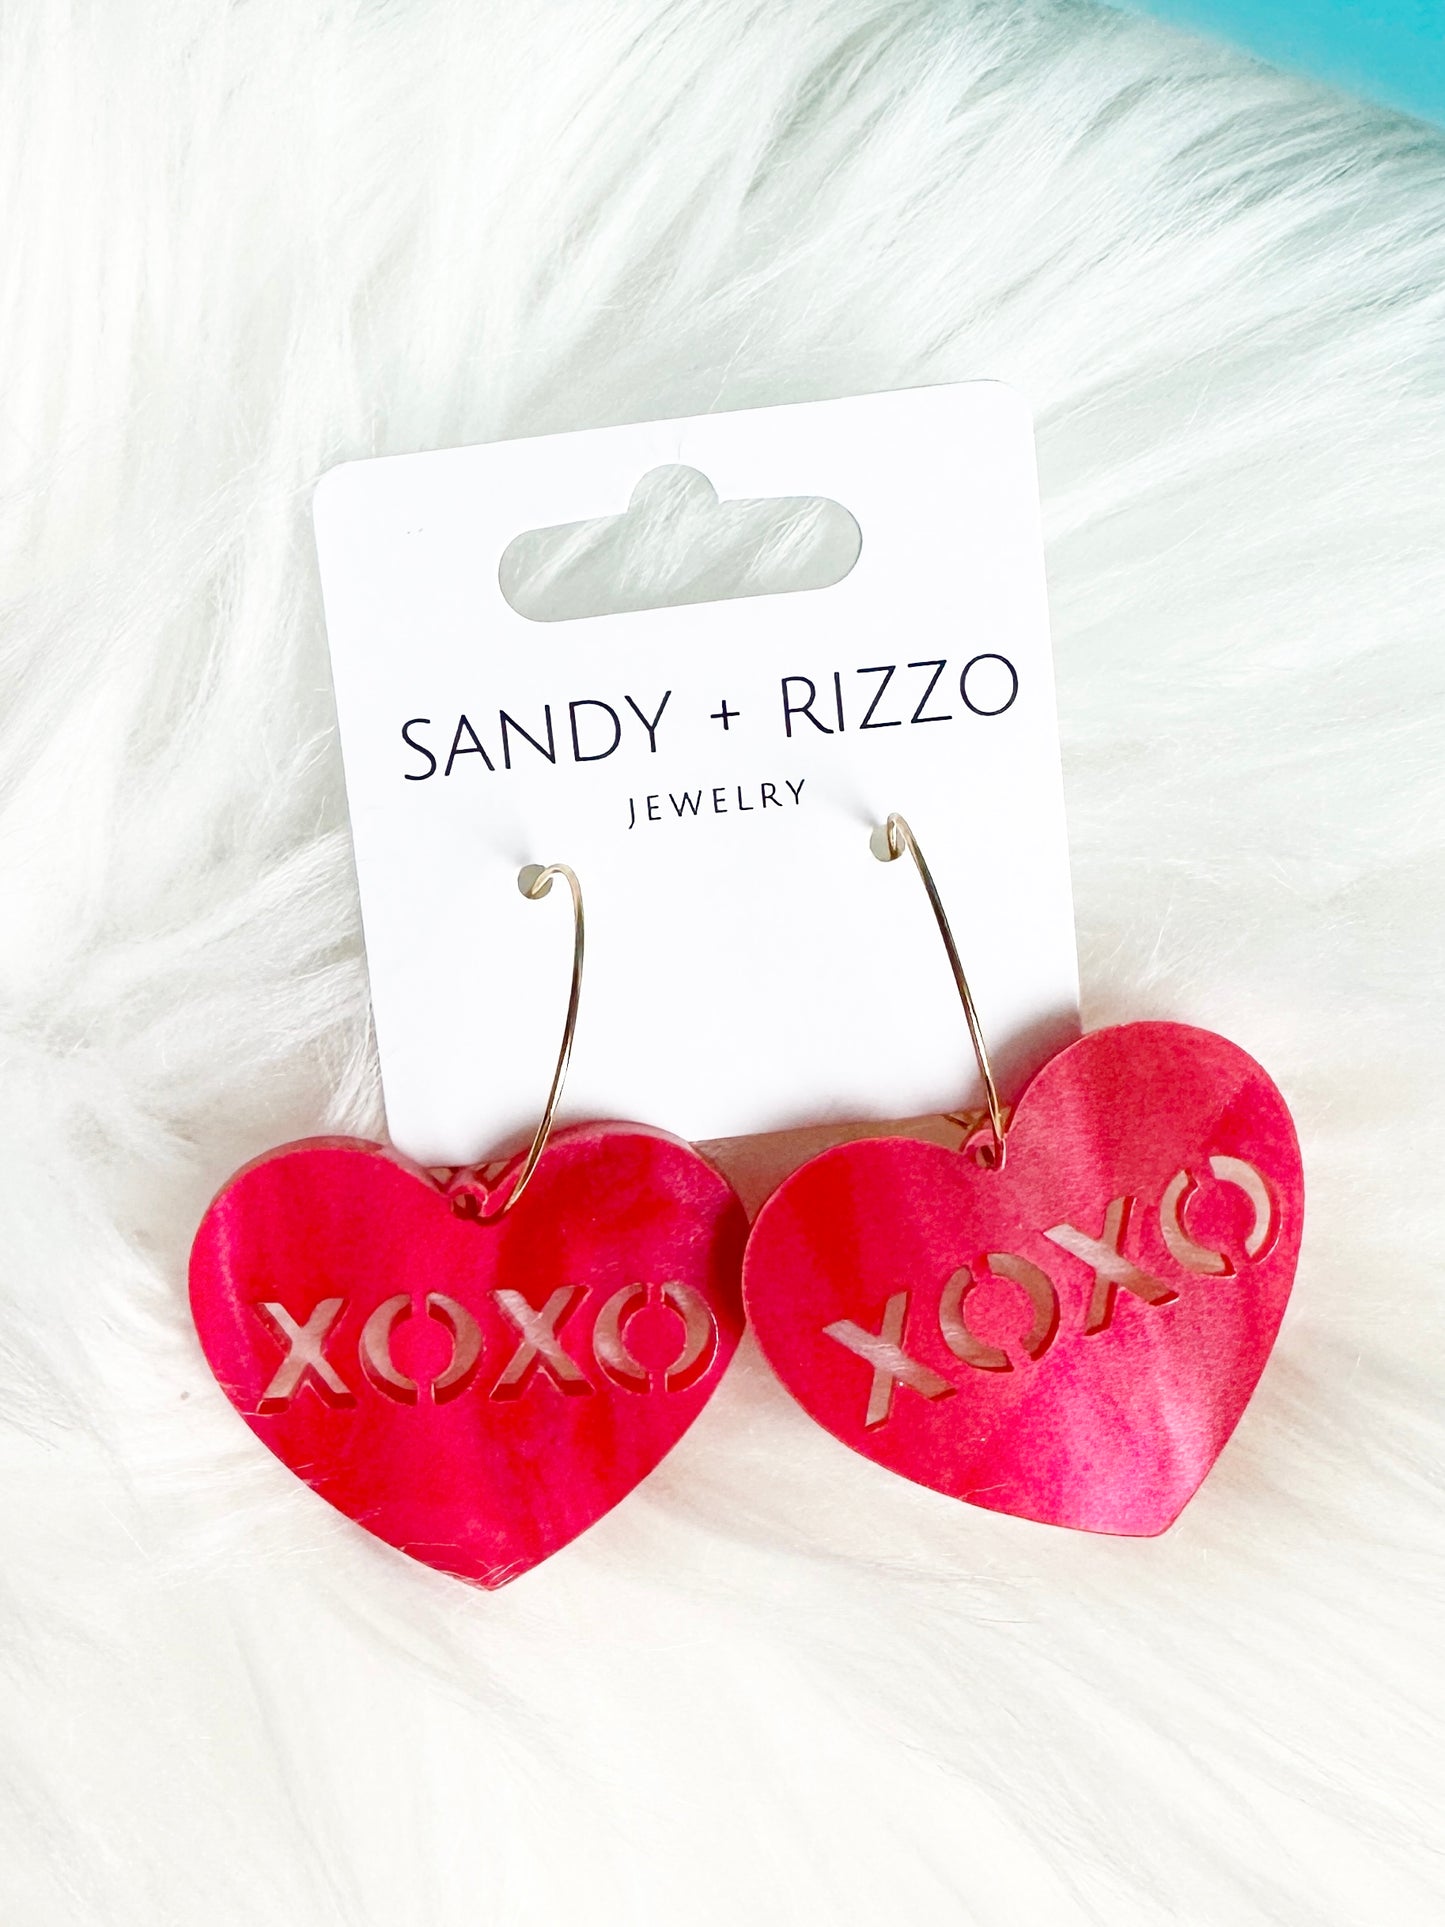 XOXO Red heart on a hoop